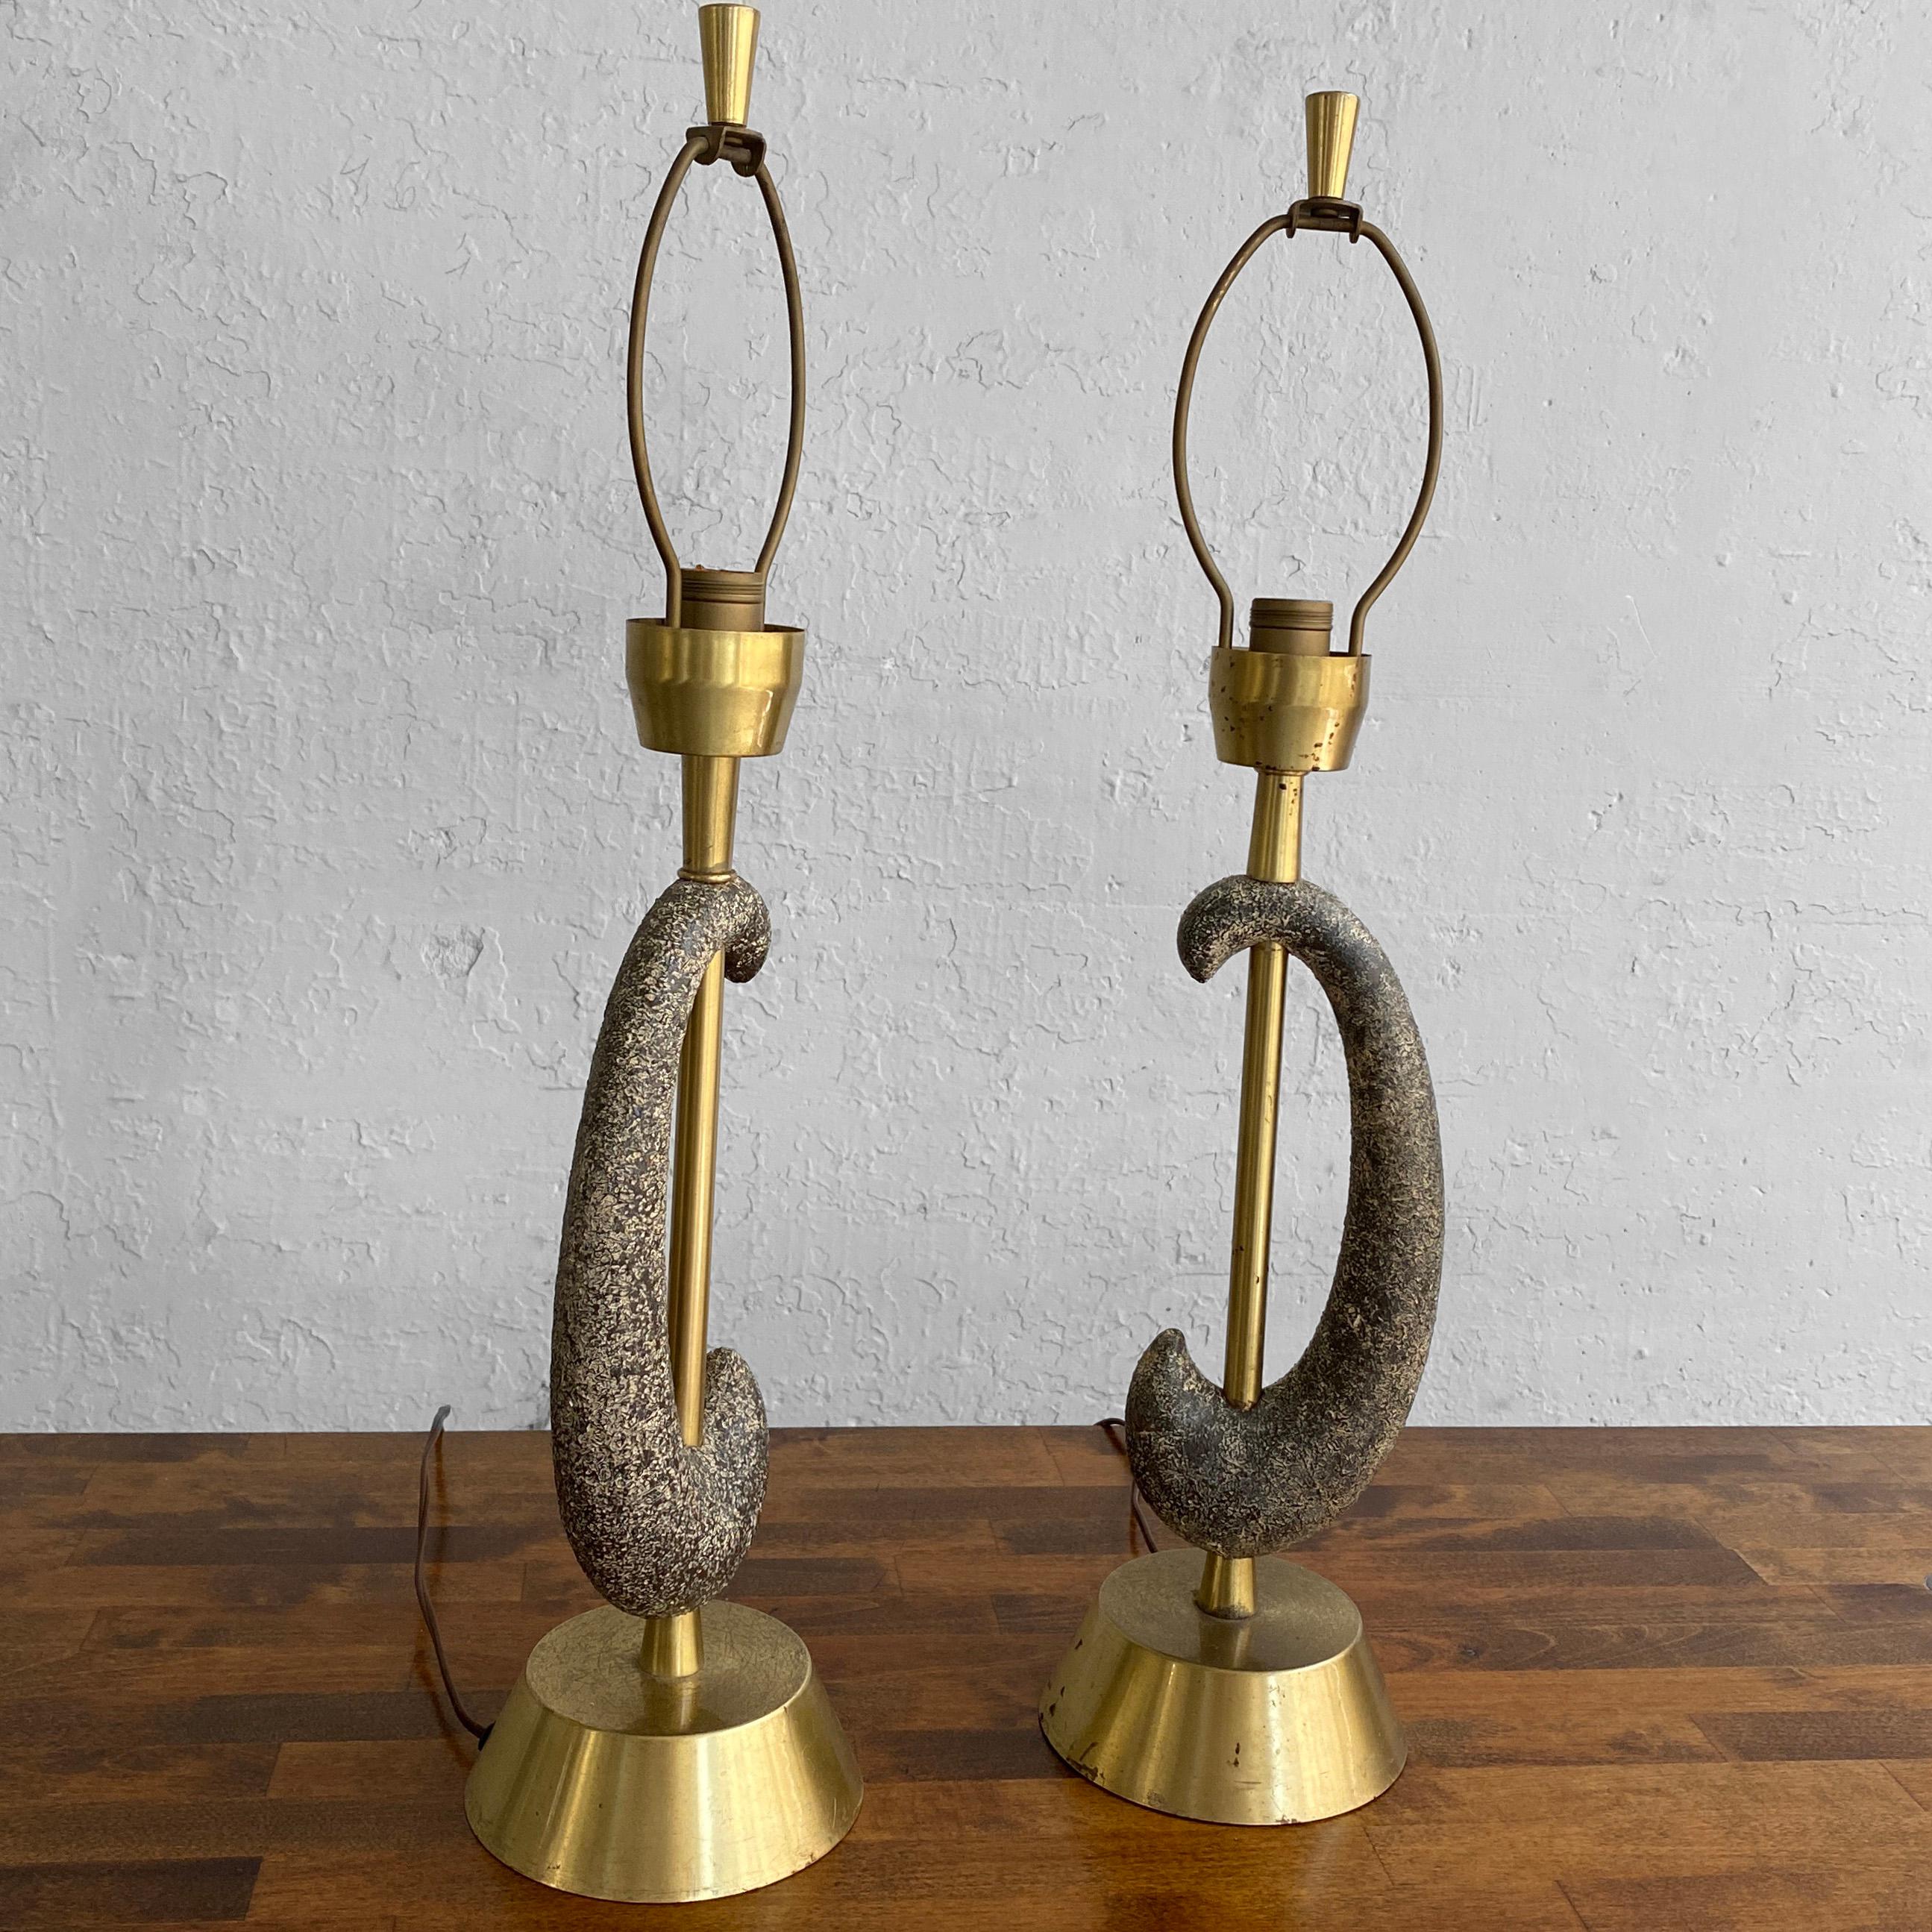 American Pair of Brass and Ceramic Arc Table Lamps by Kelby For Sale